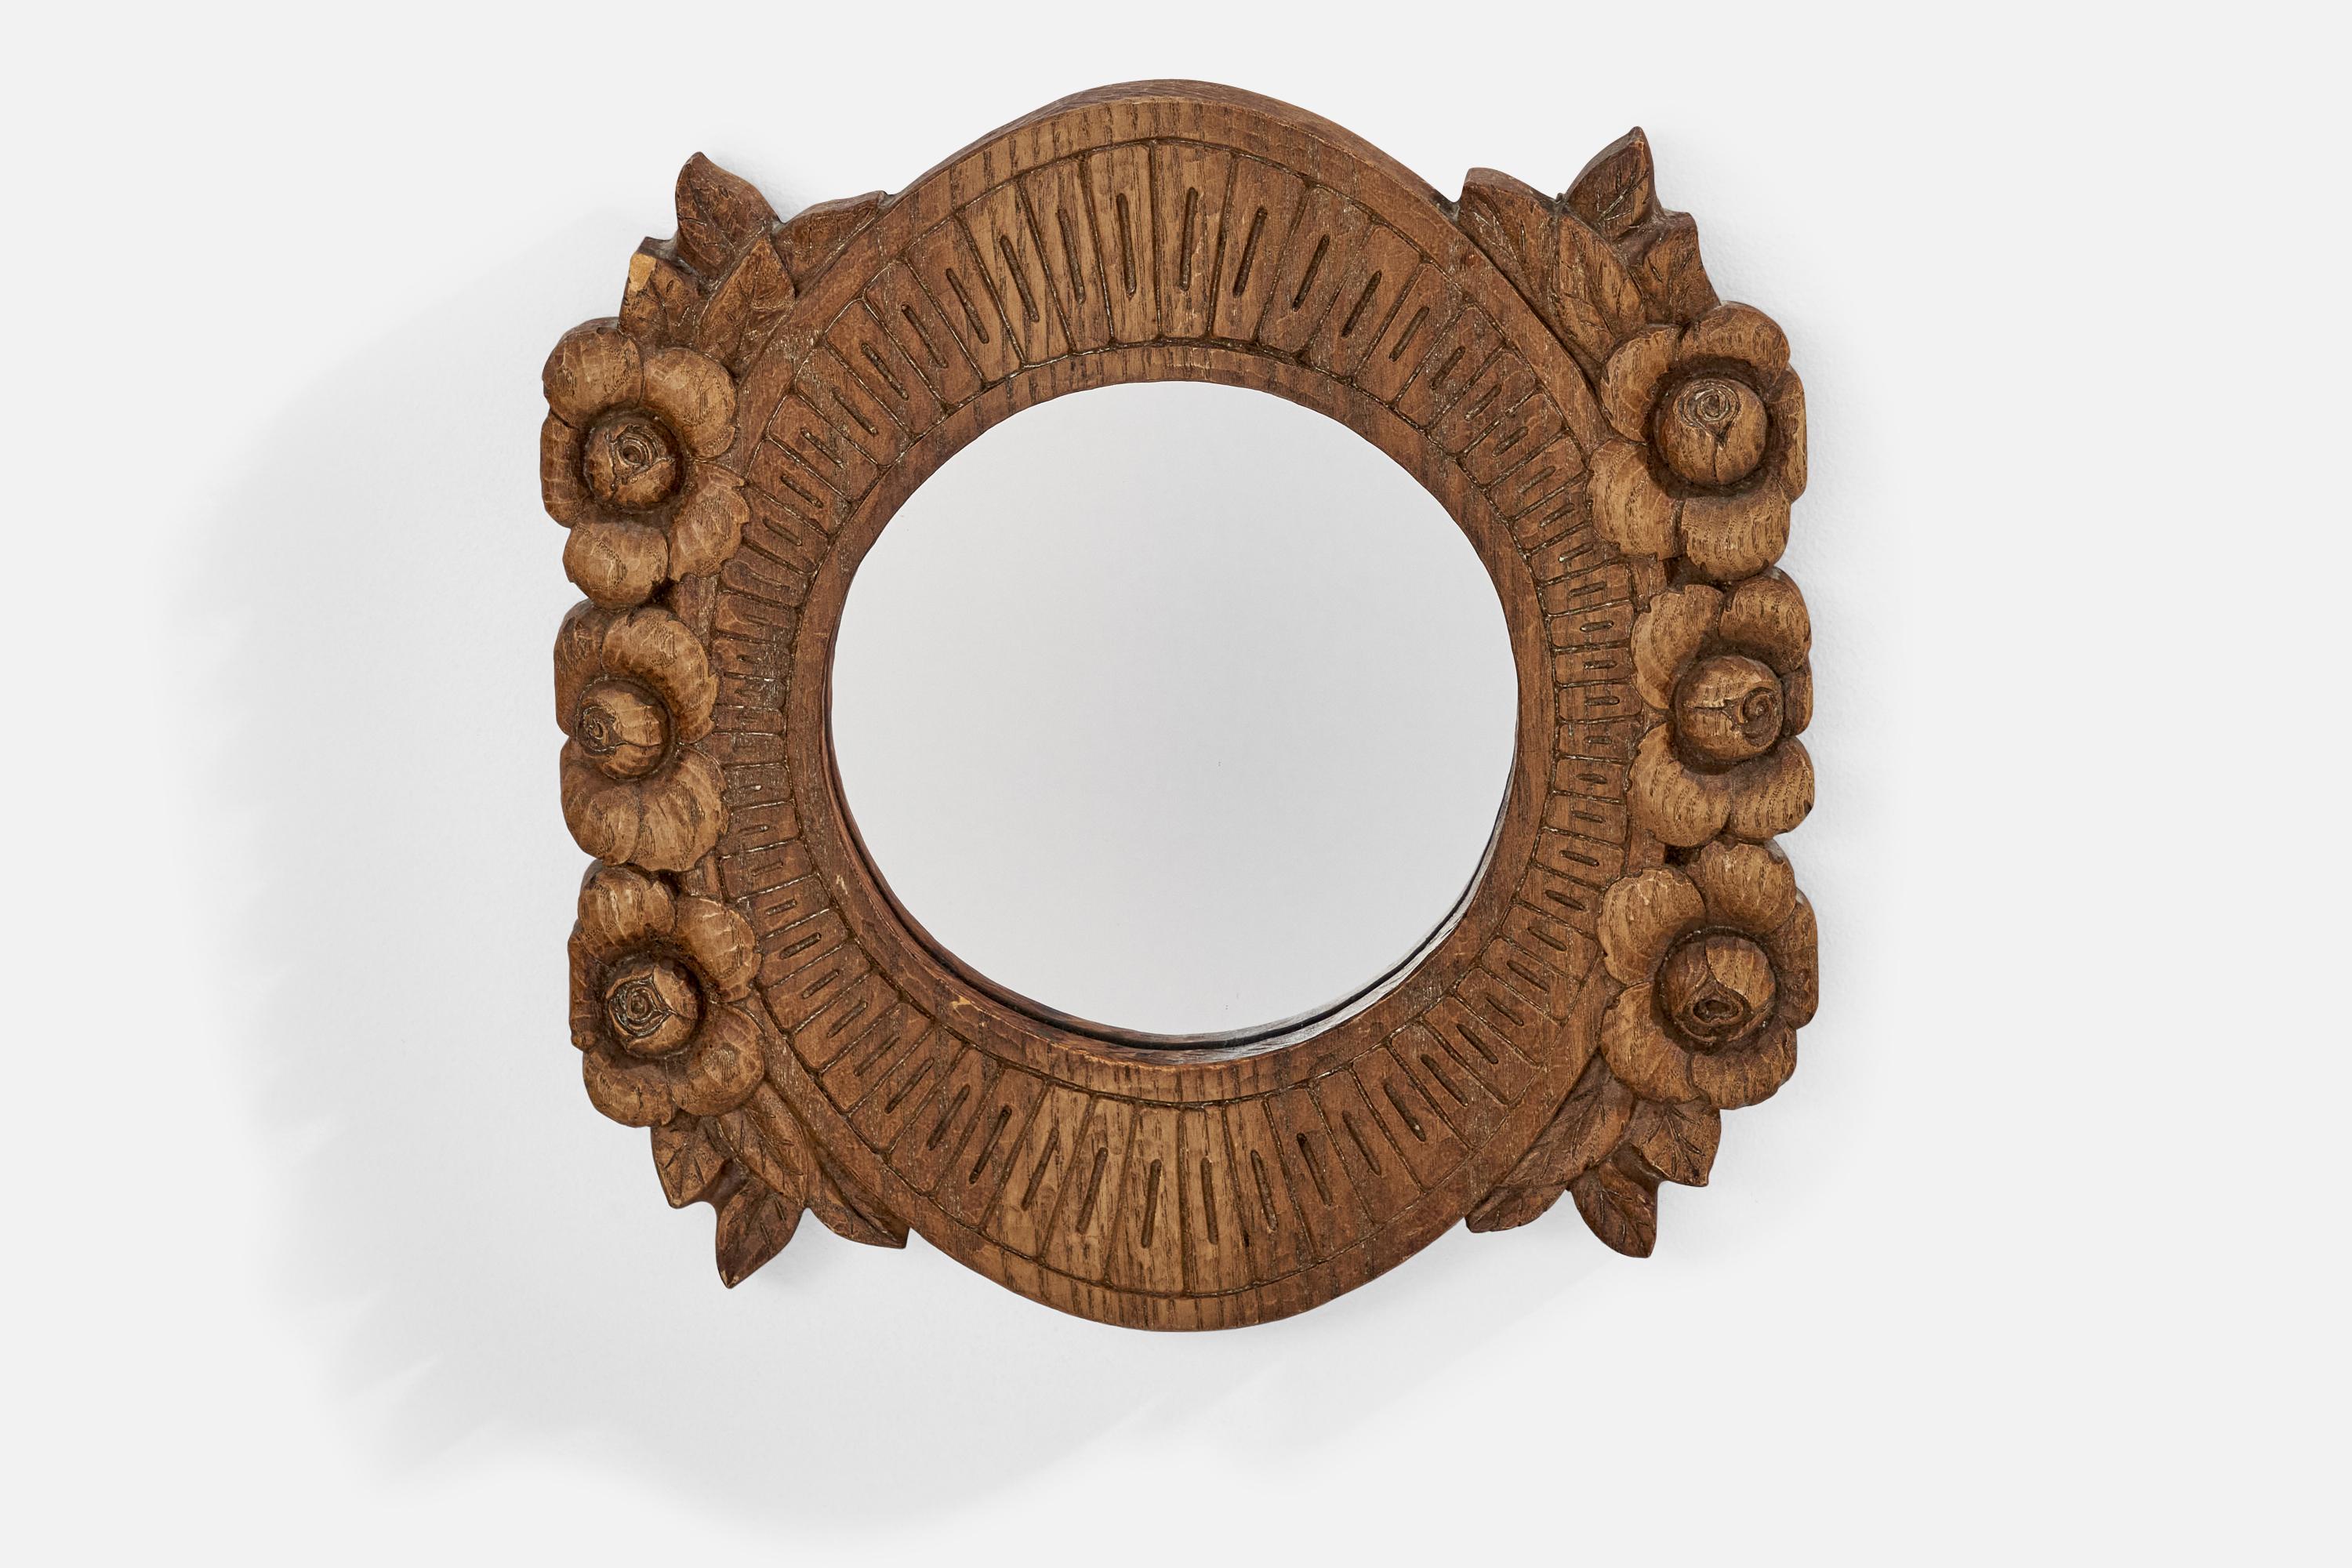 A hand-carved wood wall mirror designed and produced in the US, 1950s.

